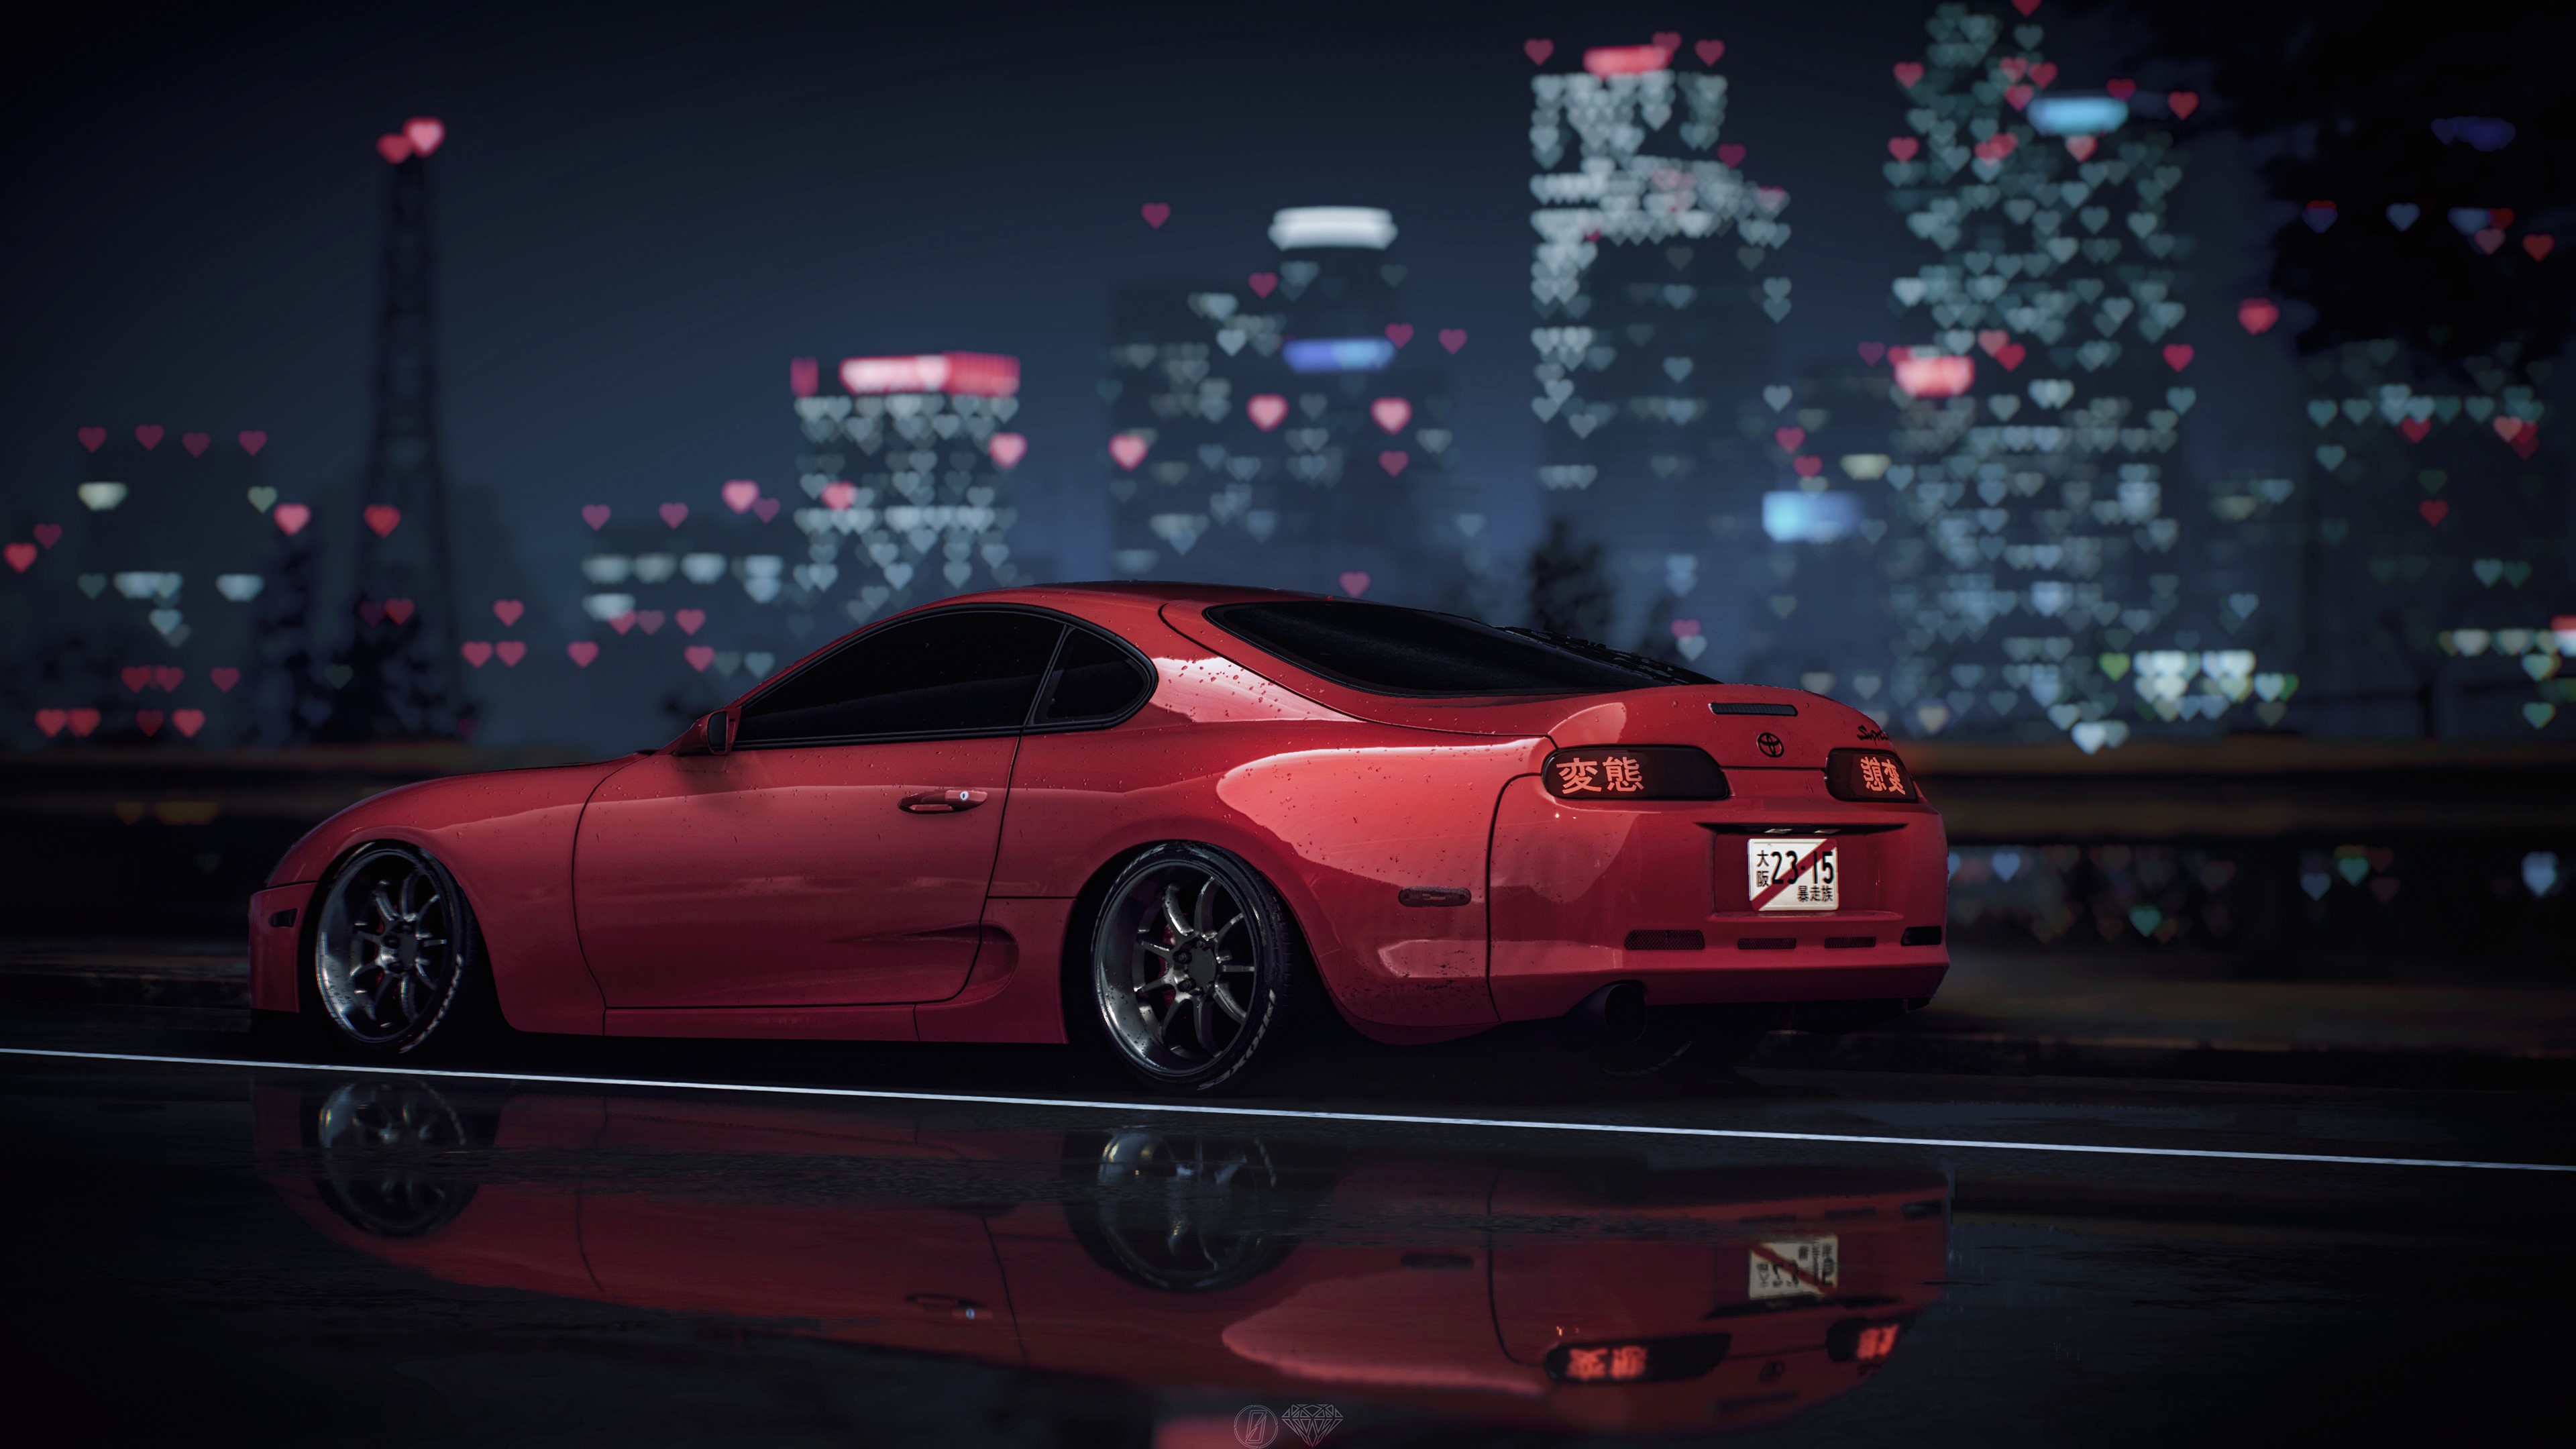 Wallpaper id toyota supra need for speed games hd k cars free download